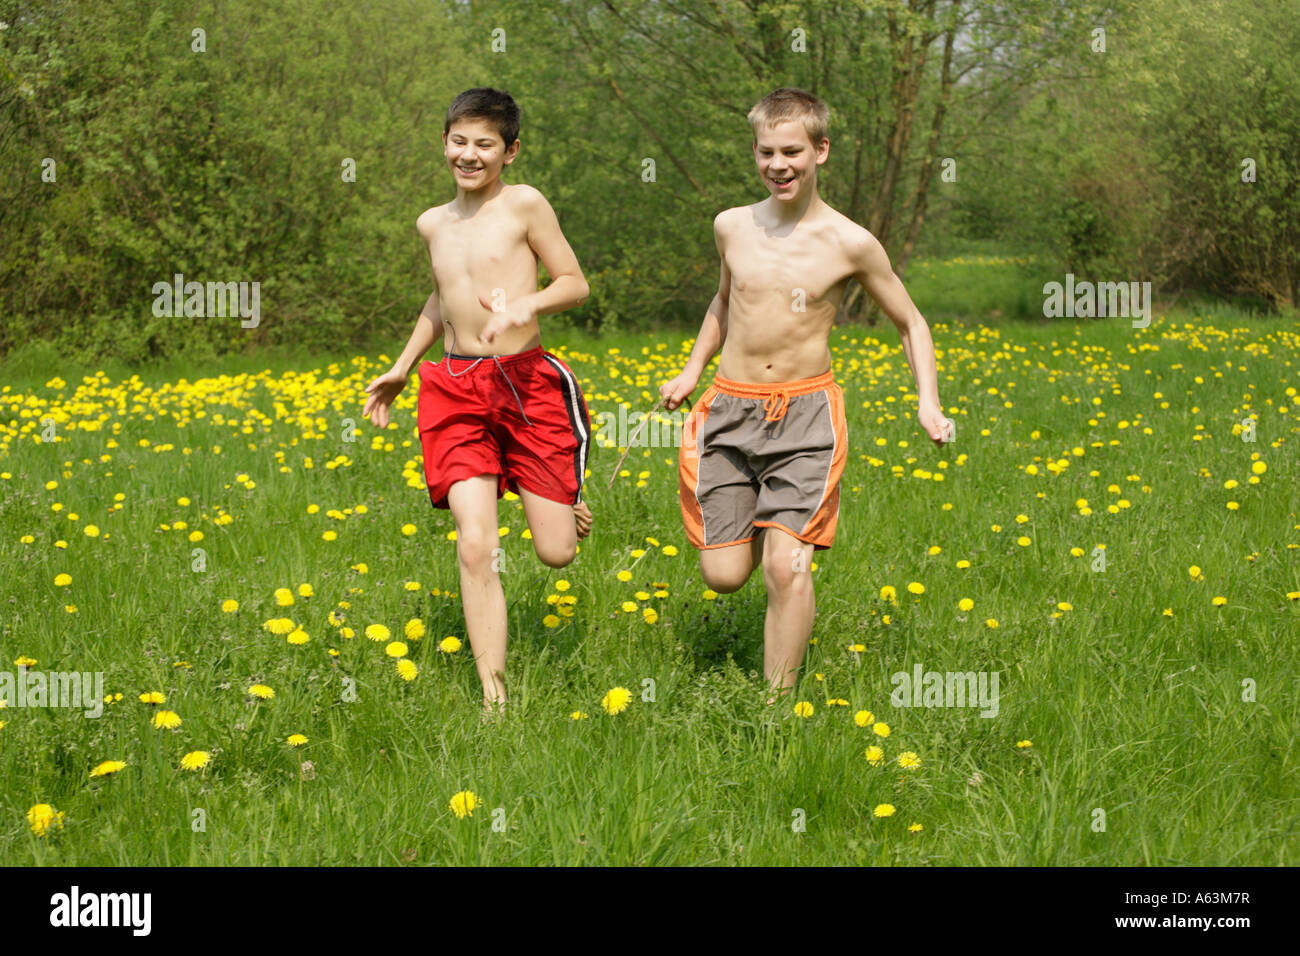 two young boys running across a meadow full of dandelions Stock Photo -  Alamy